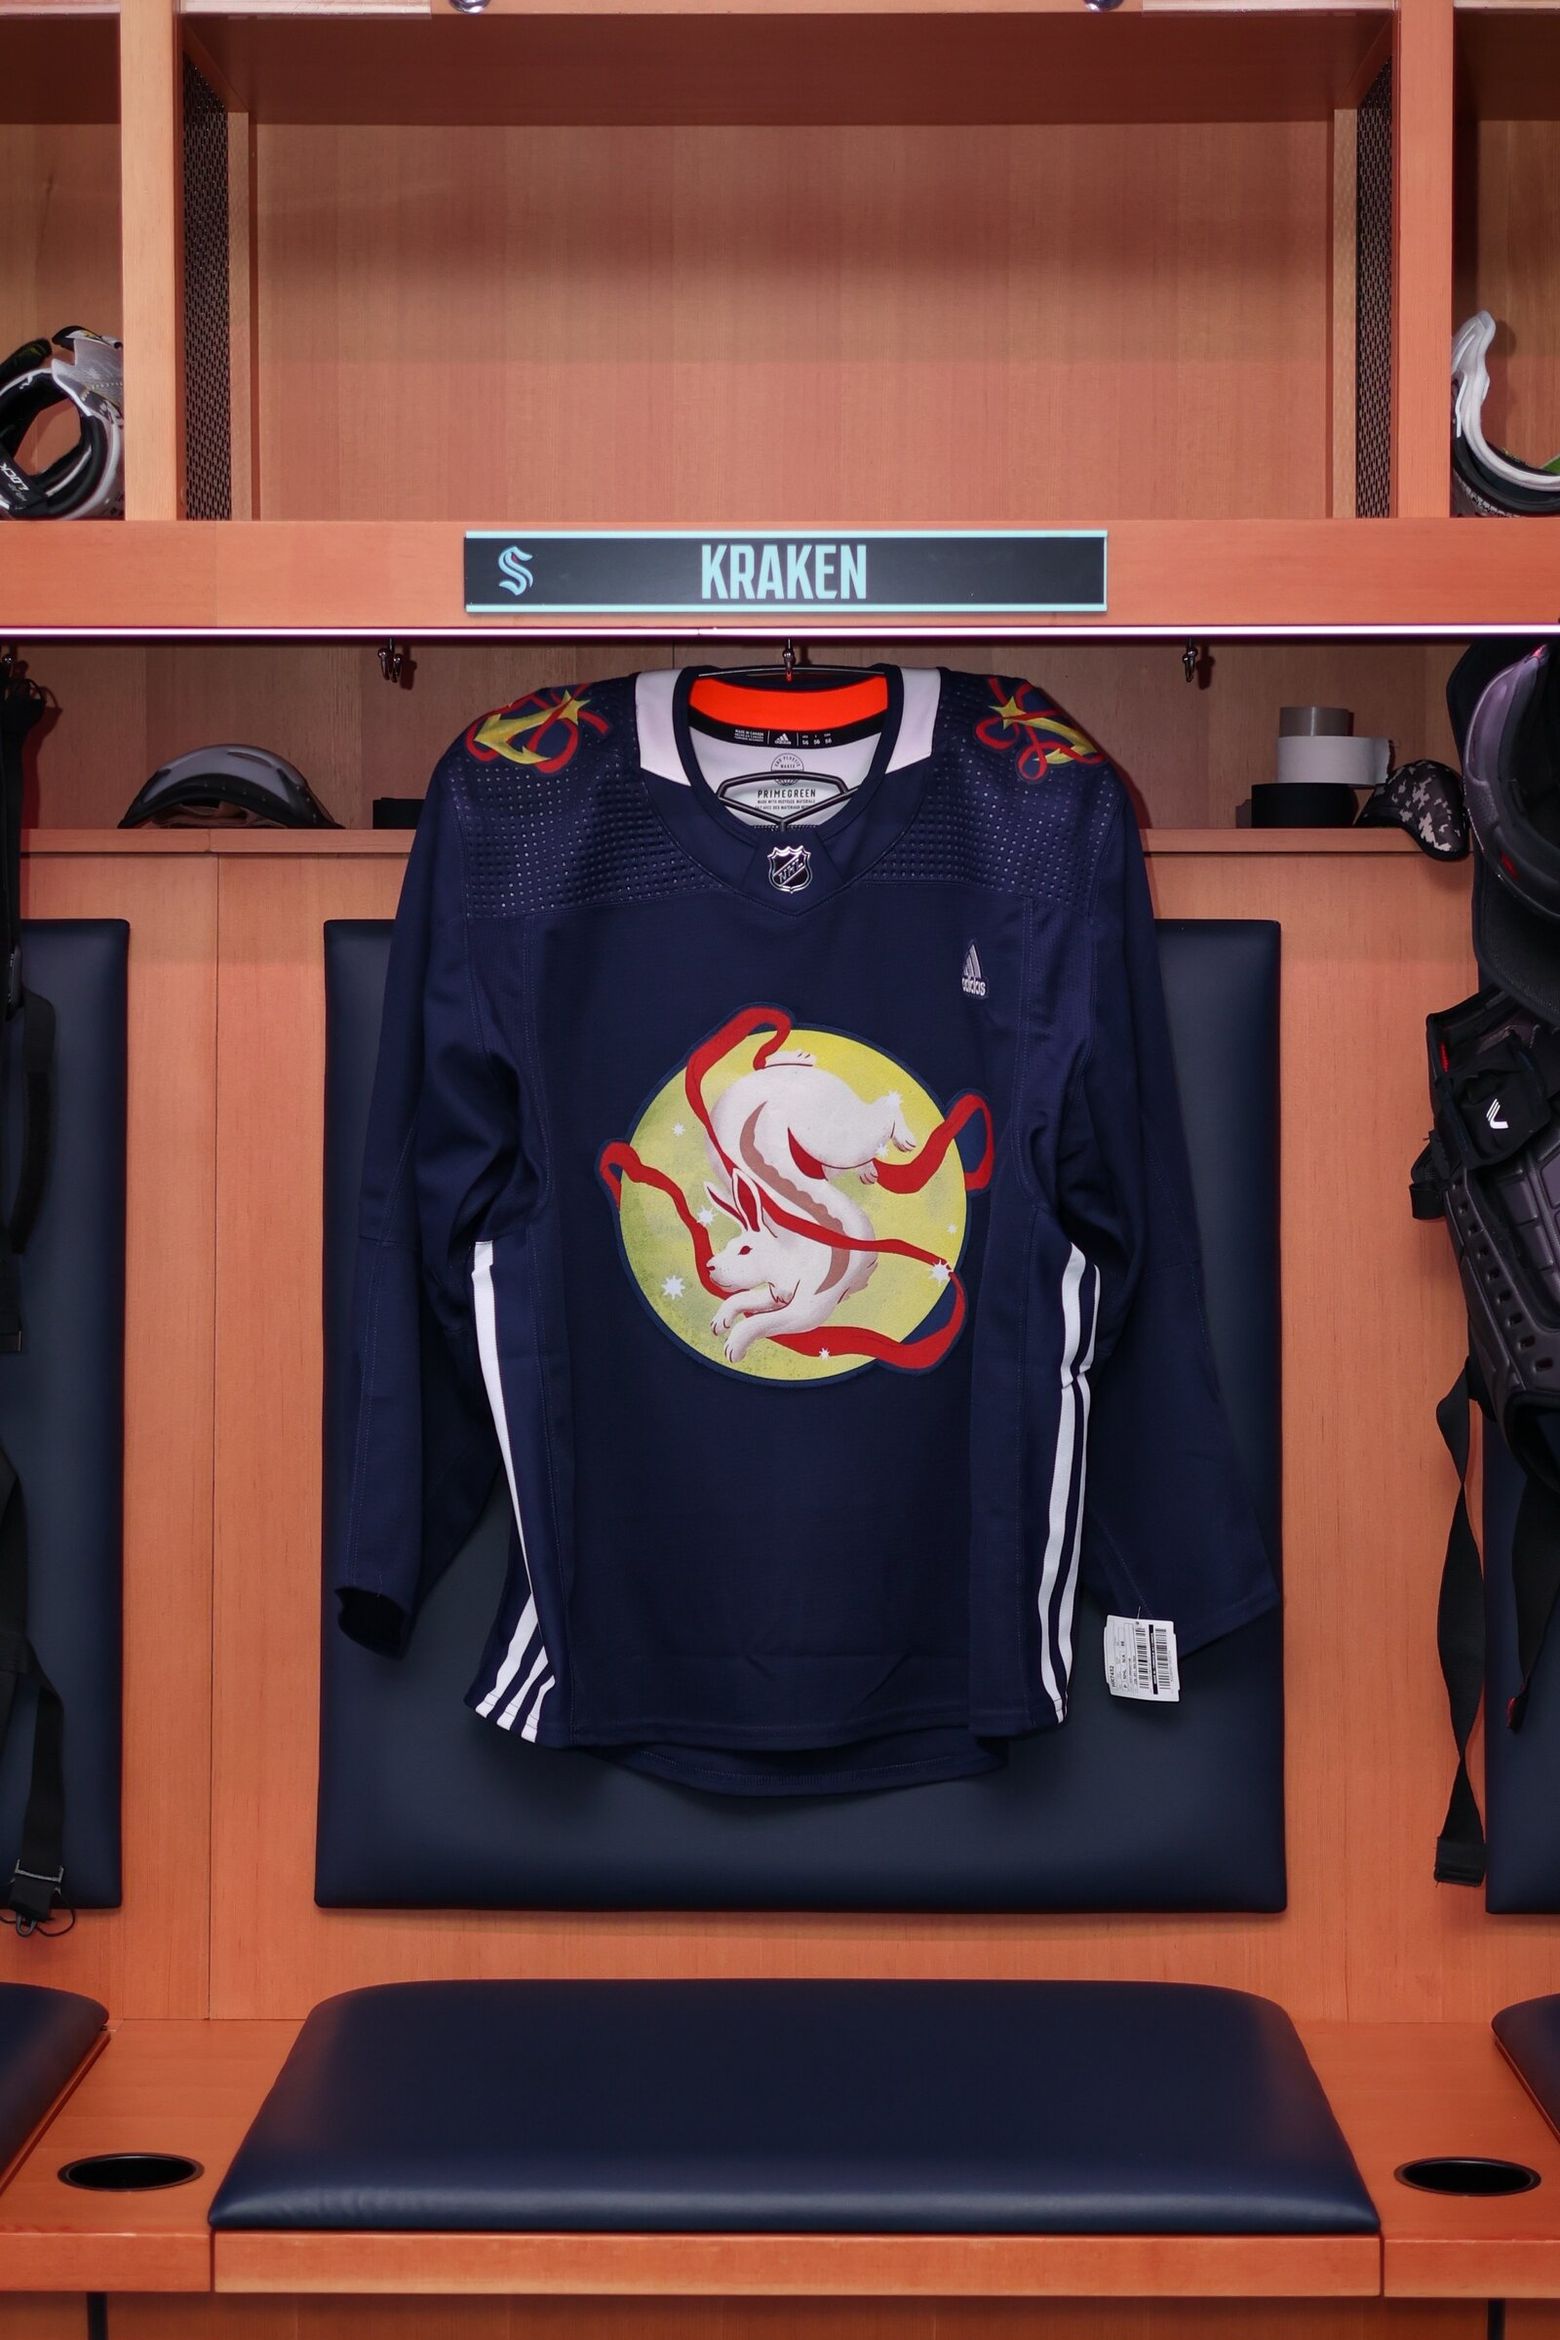 The New Jersey Devils celebrates Chinese Lunar New Year in NHL